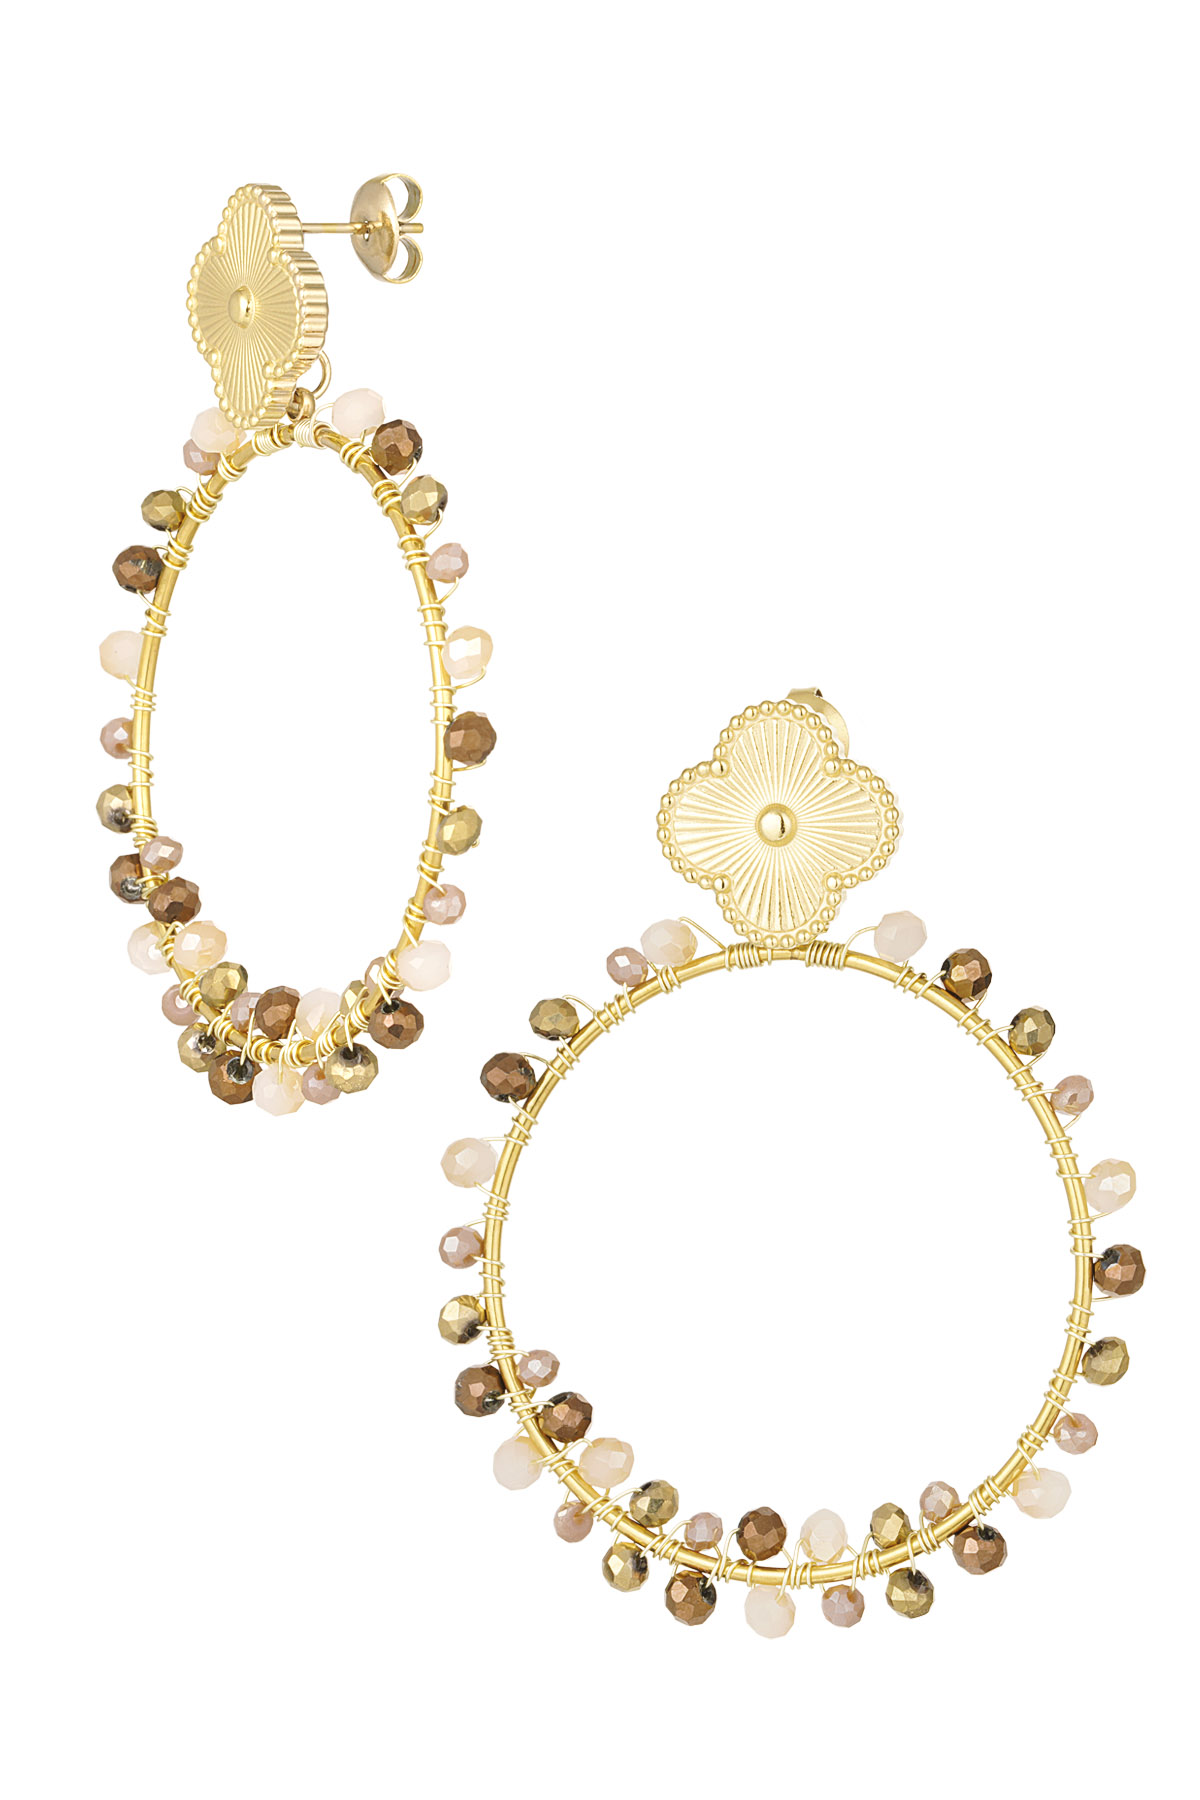 Clover earrings with beads - gold/beige